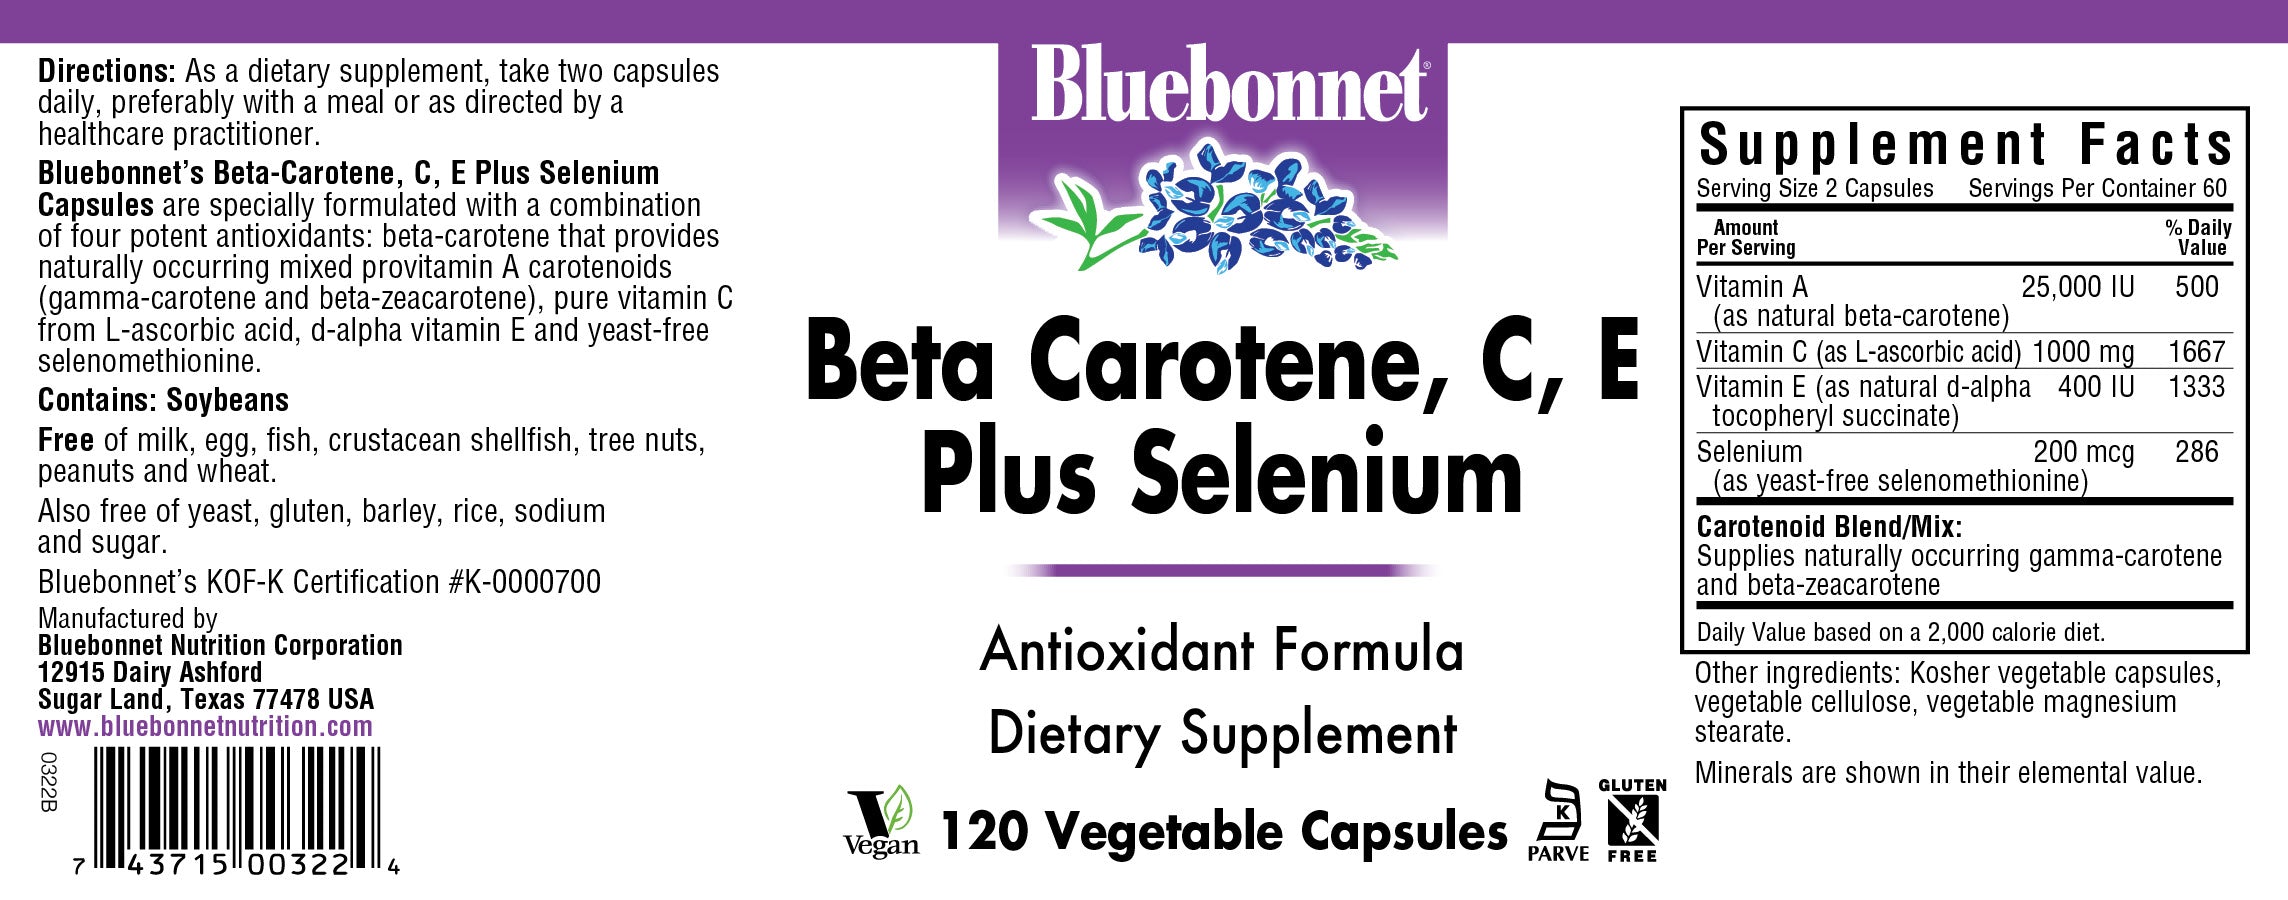 Bluebonnet’s Beta-Carotene, C, E and Selenium 120 Vegetable Capsules are specially formulated with a combination of four potent antioxidants: beta-carotene that provides mixed provitamin A carotenoids (gamma carotene and beta-zeacarotene), vitamin C from L-ascorbic acid, d-alpha vitamin E and yeast-free selenomethionine. #size_120 count